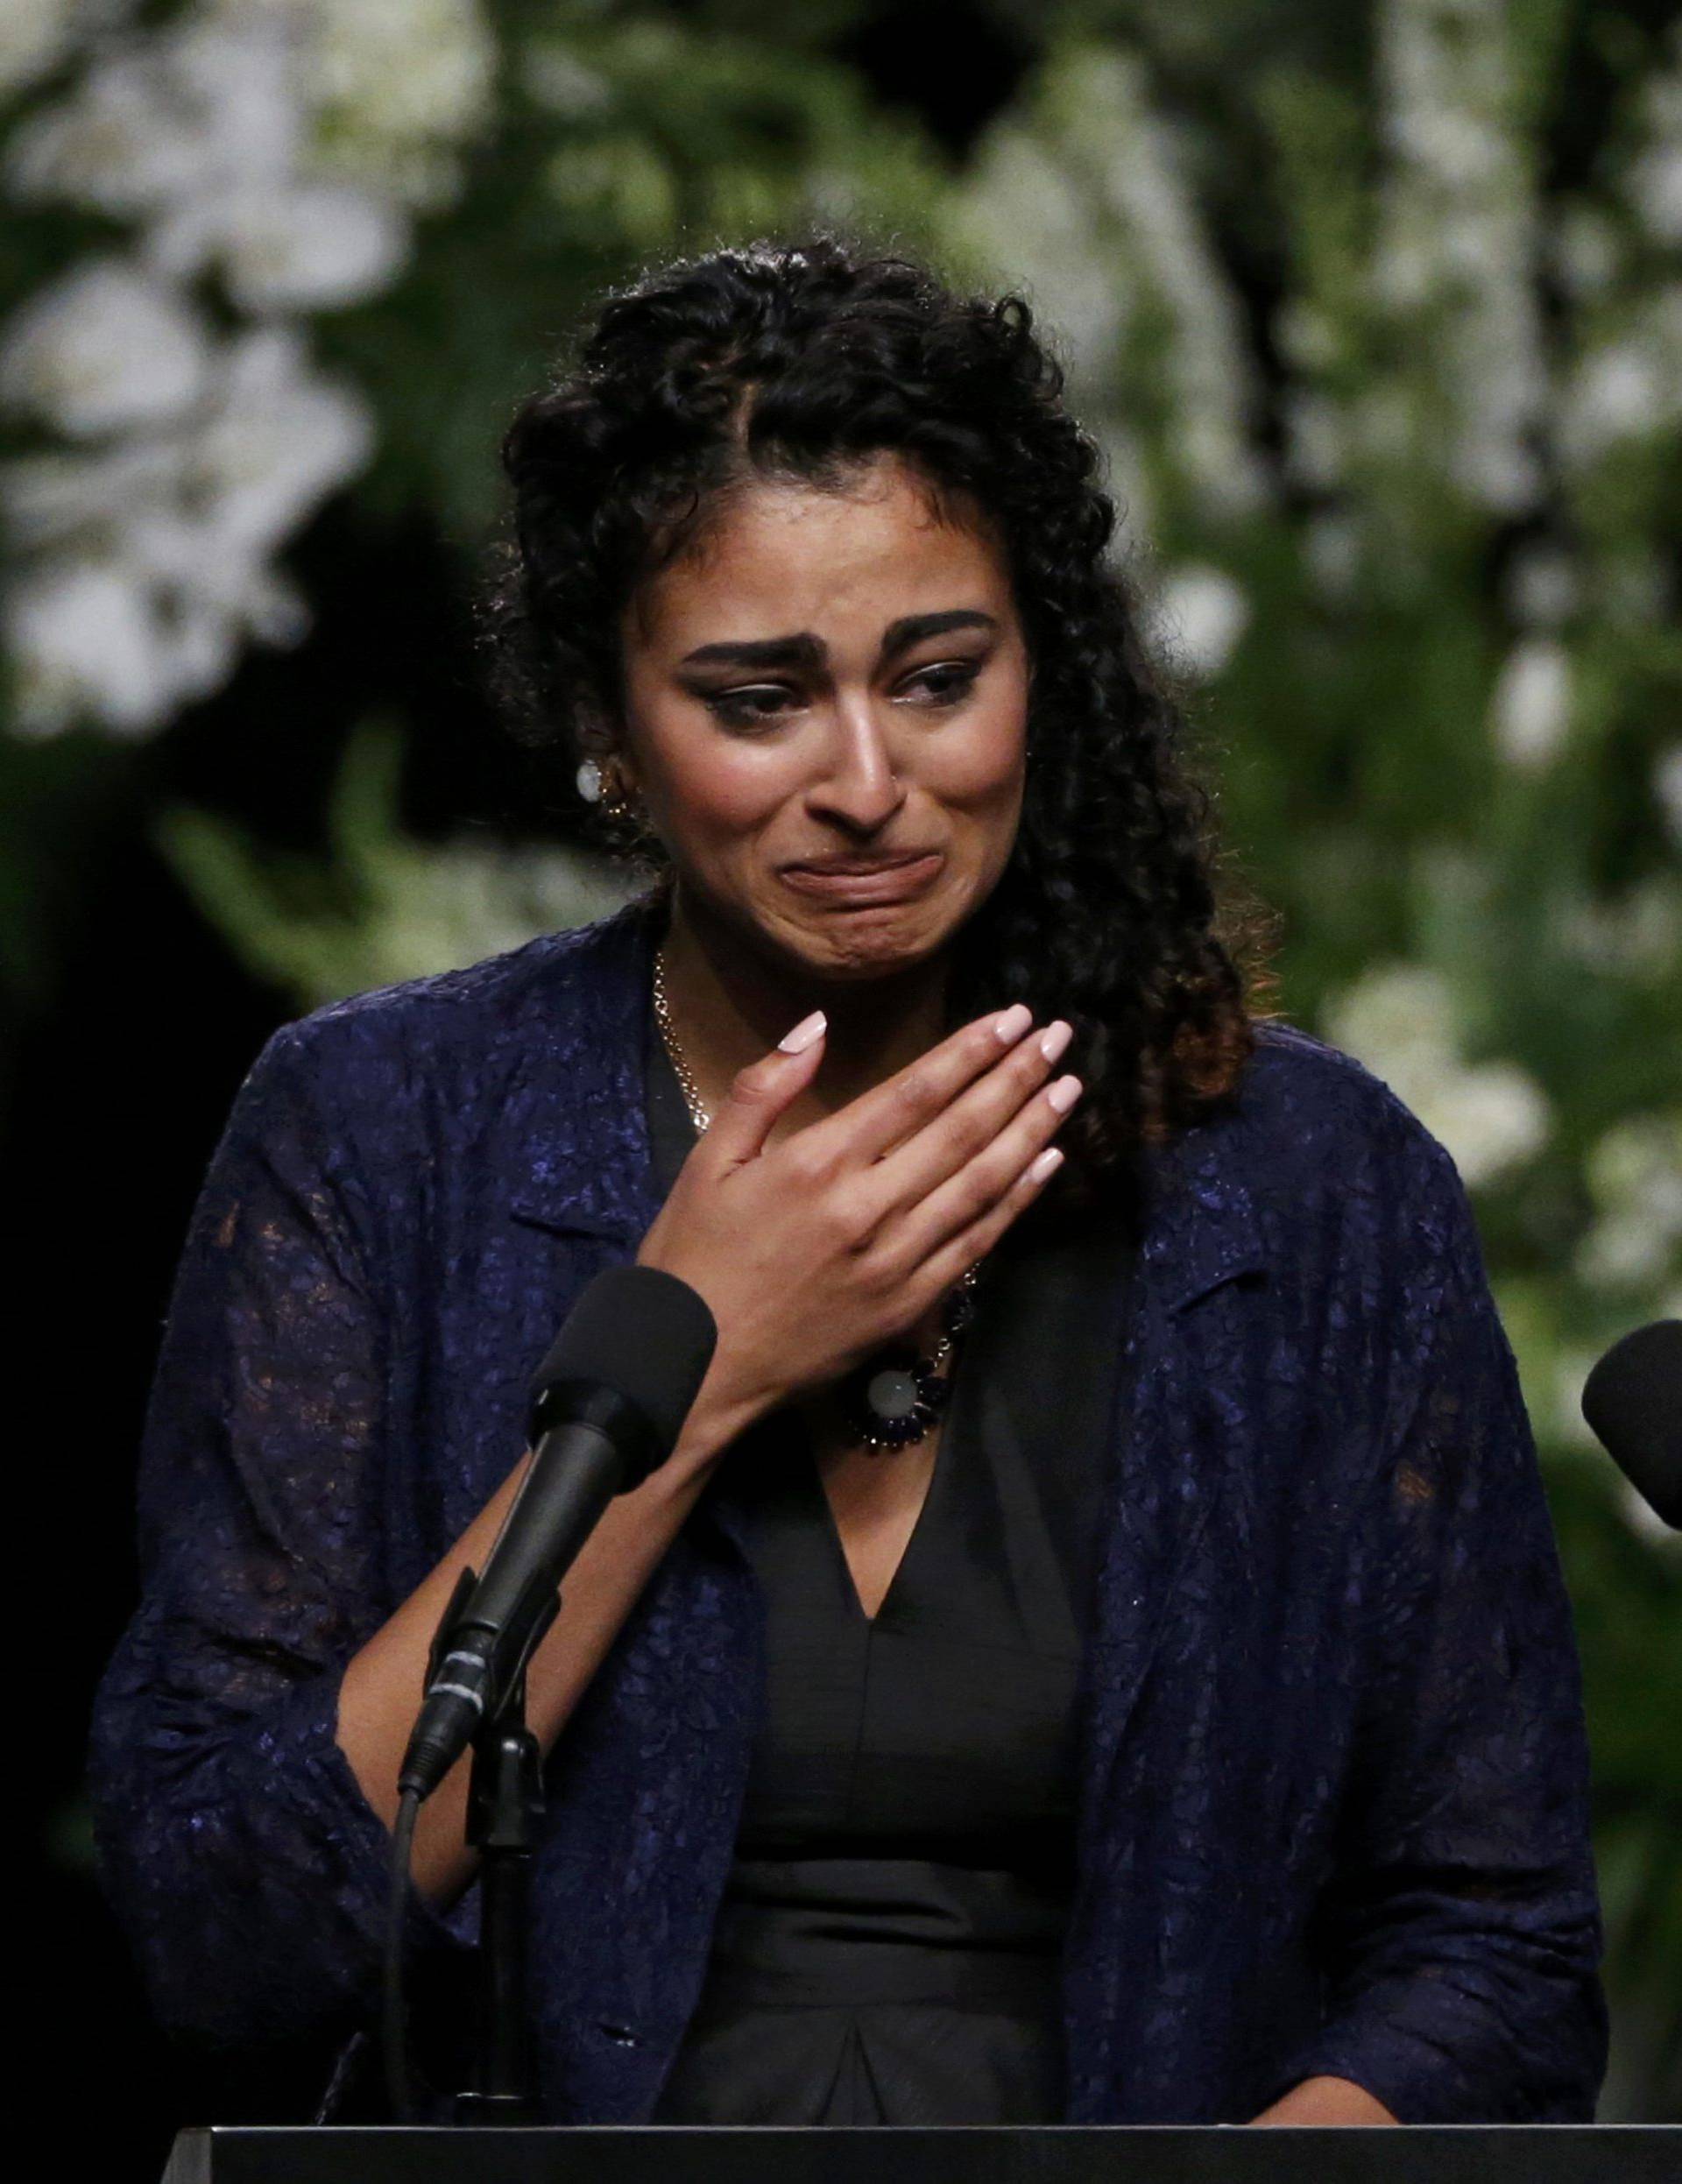 Natasha Mundkur, a student at the University of Louisville, speaks at a memorial service for the late boxer Muhammad Ali in Louisville, Kentucky